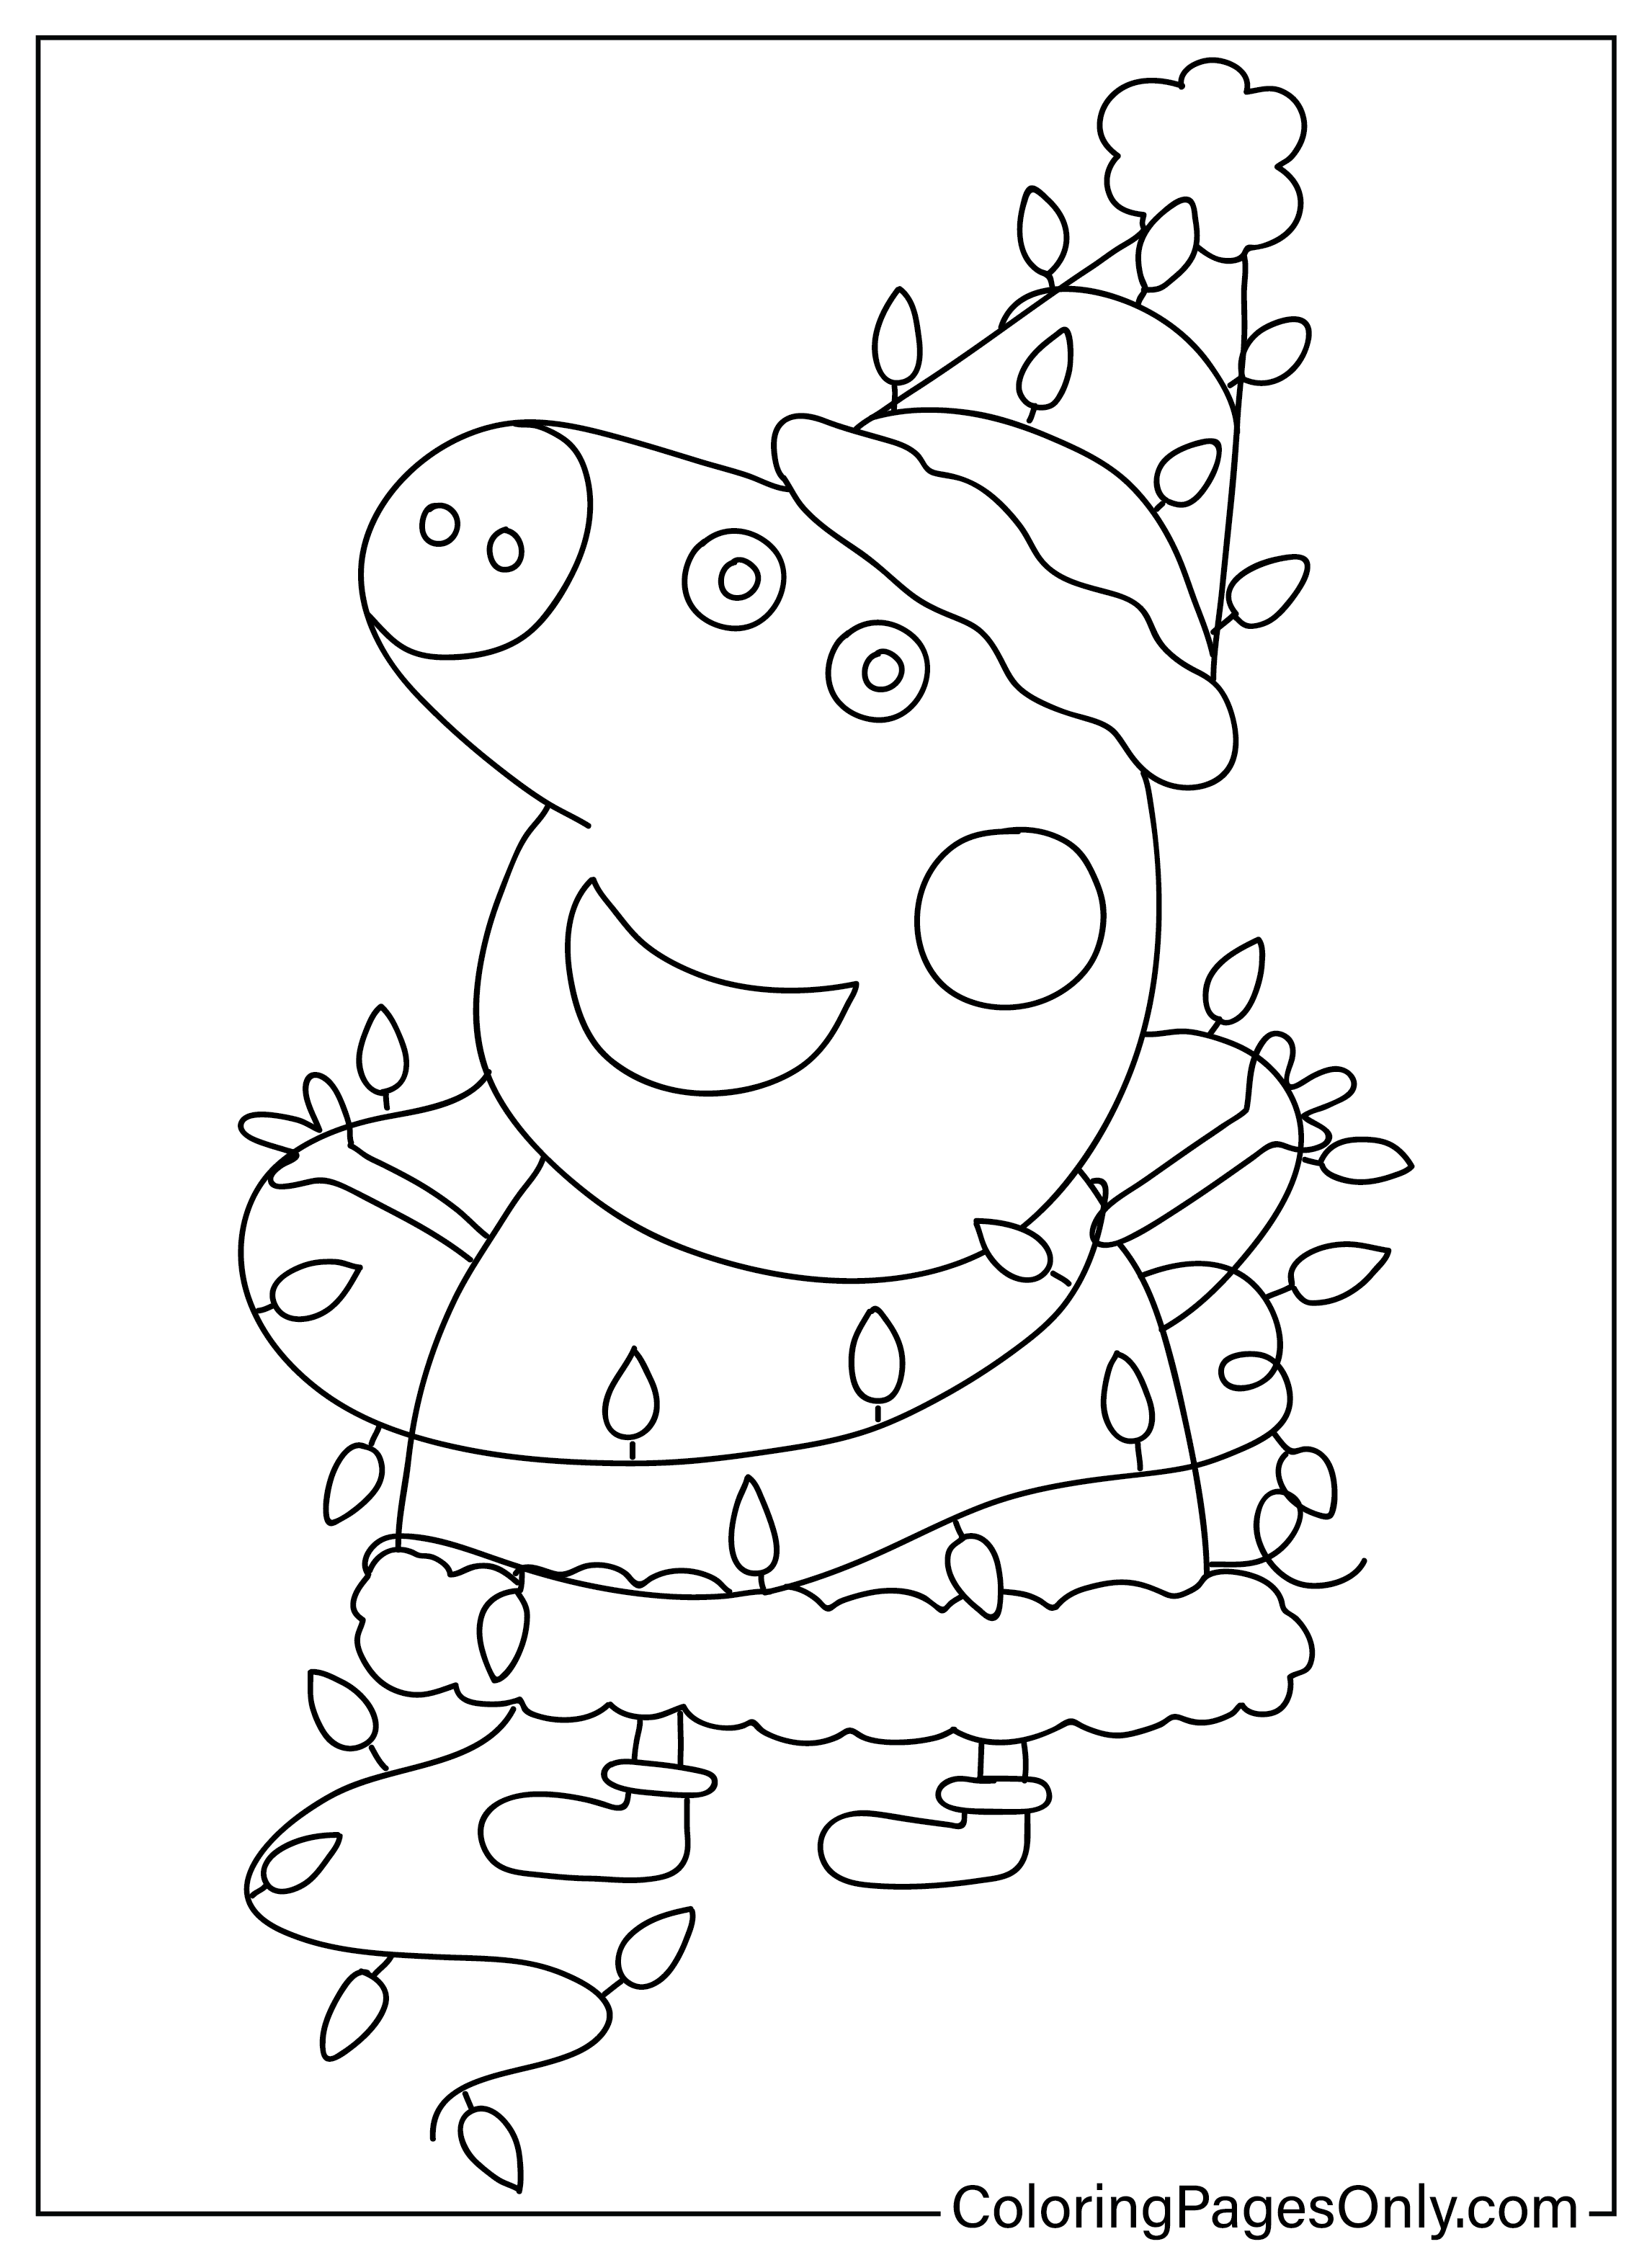 Christmas Peppa Pig Coloring Page from Christmas Cartoon